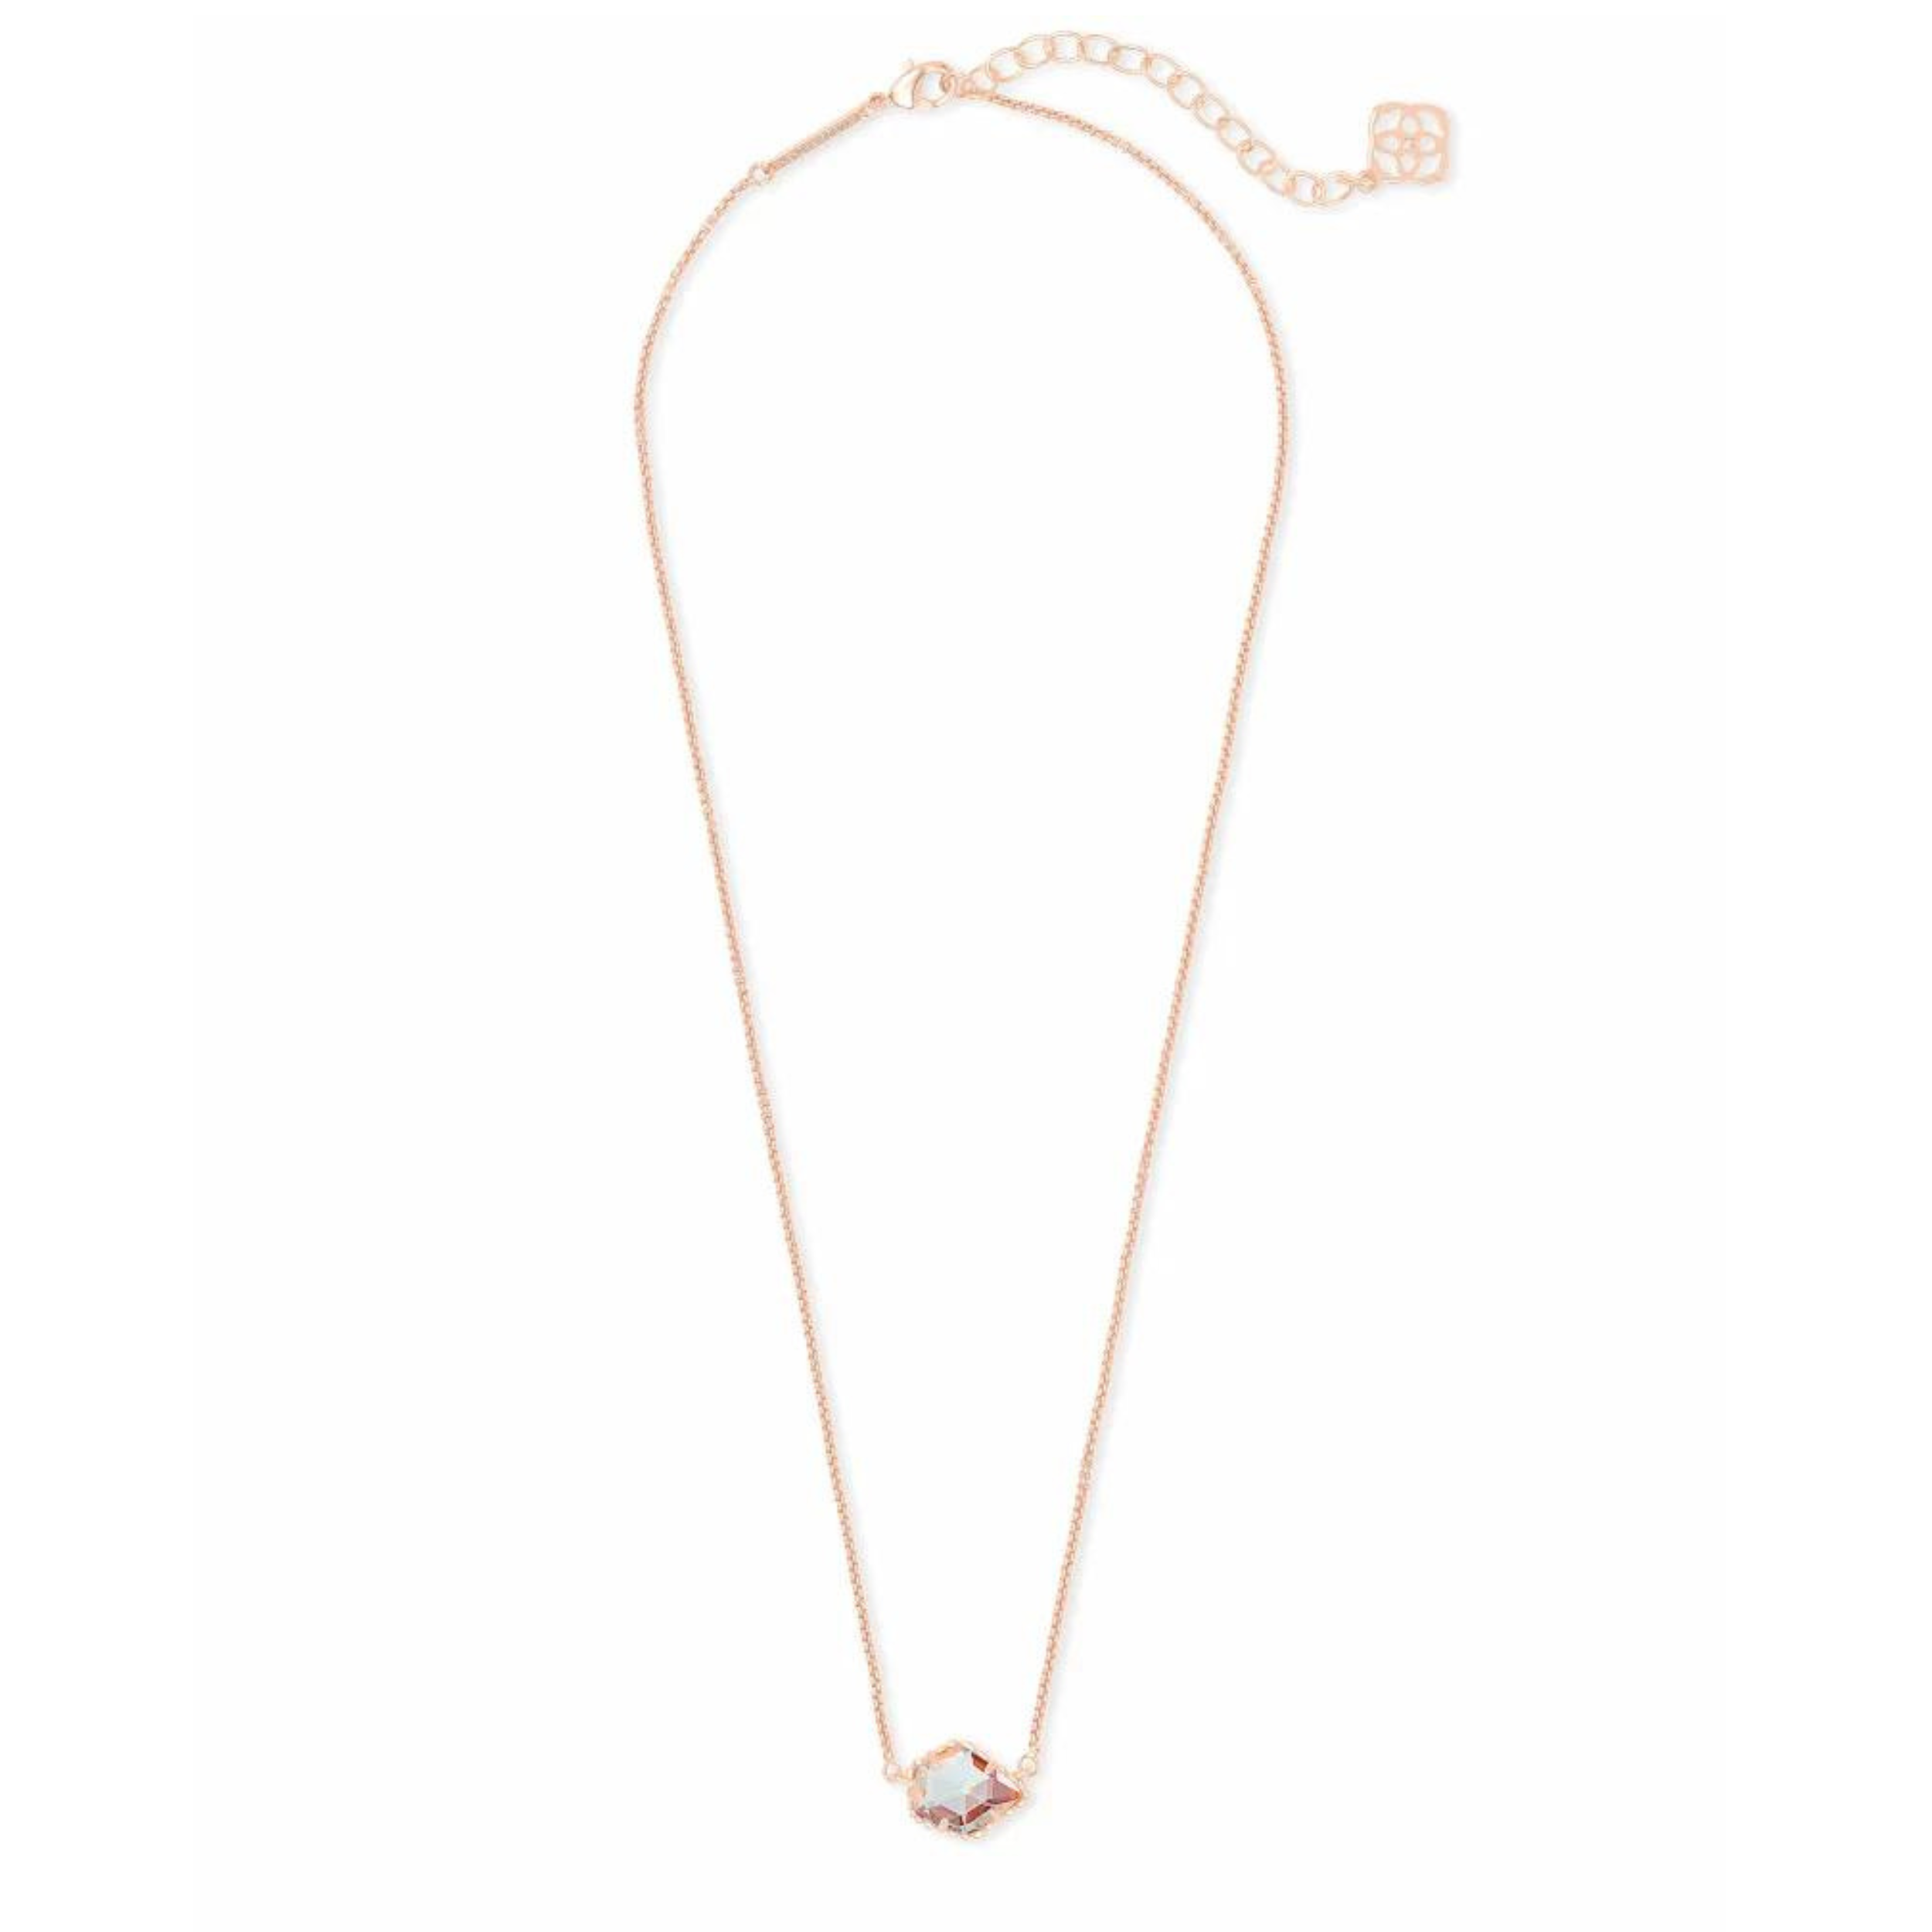 Kendra Scott | Tess Rose Gold Pendant Necklace in Dichroic Glass - Giddy Up Glamour Boutique